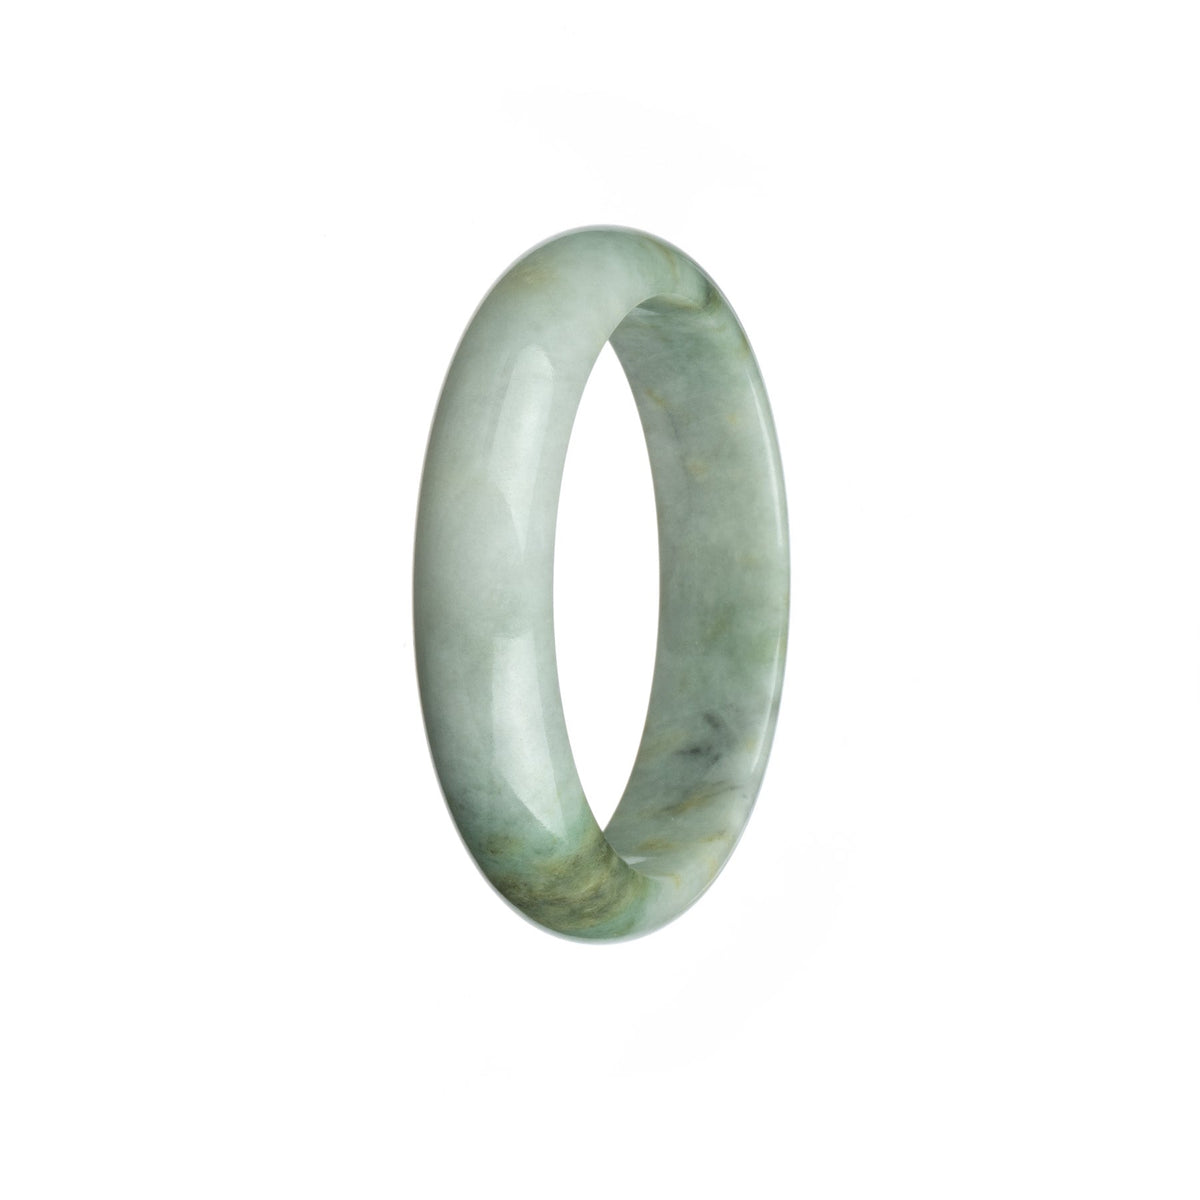 Certified Type A White with Green and Grey Burmese Jade Bracelet - 54mm Half Moon